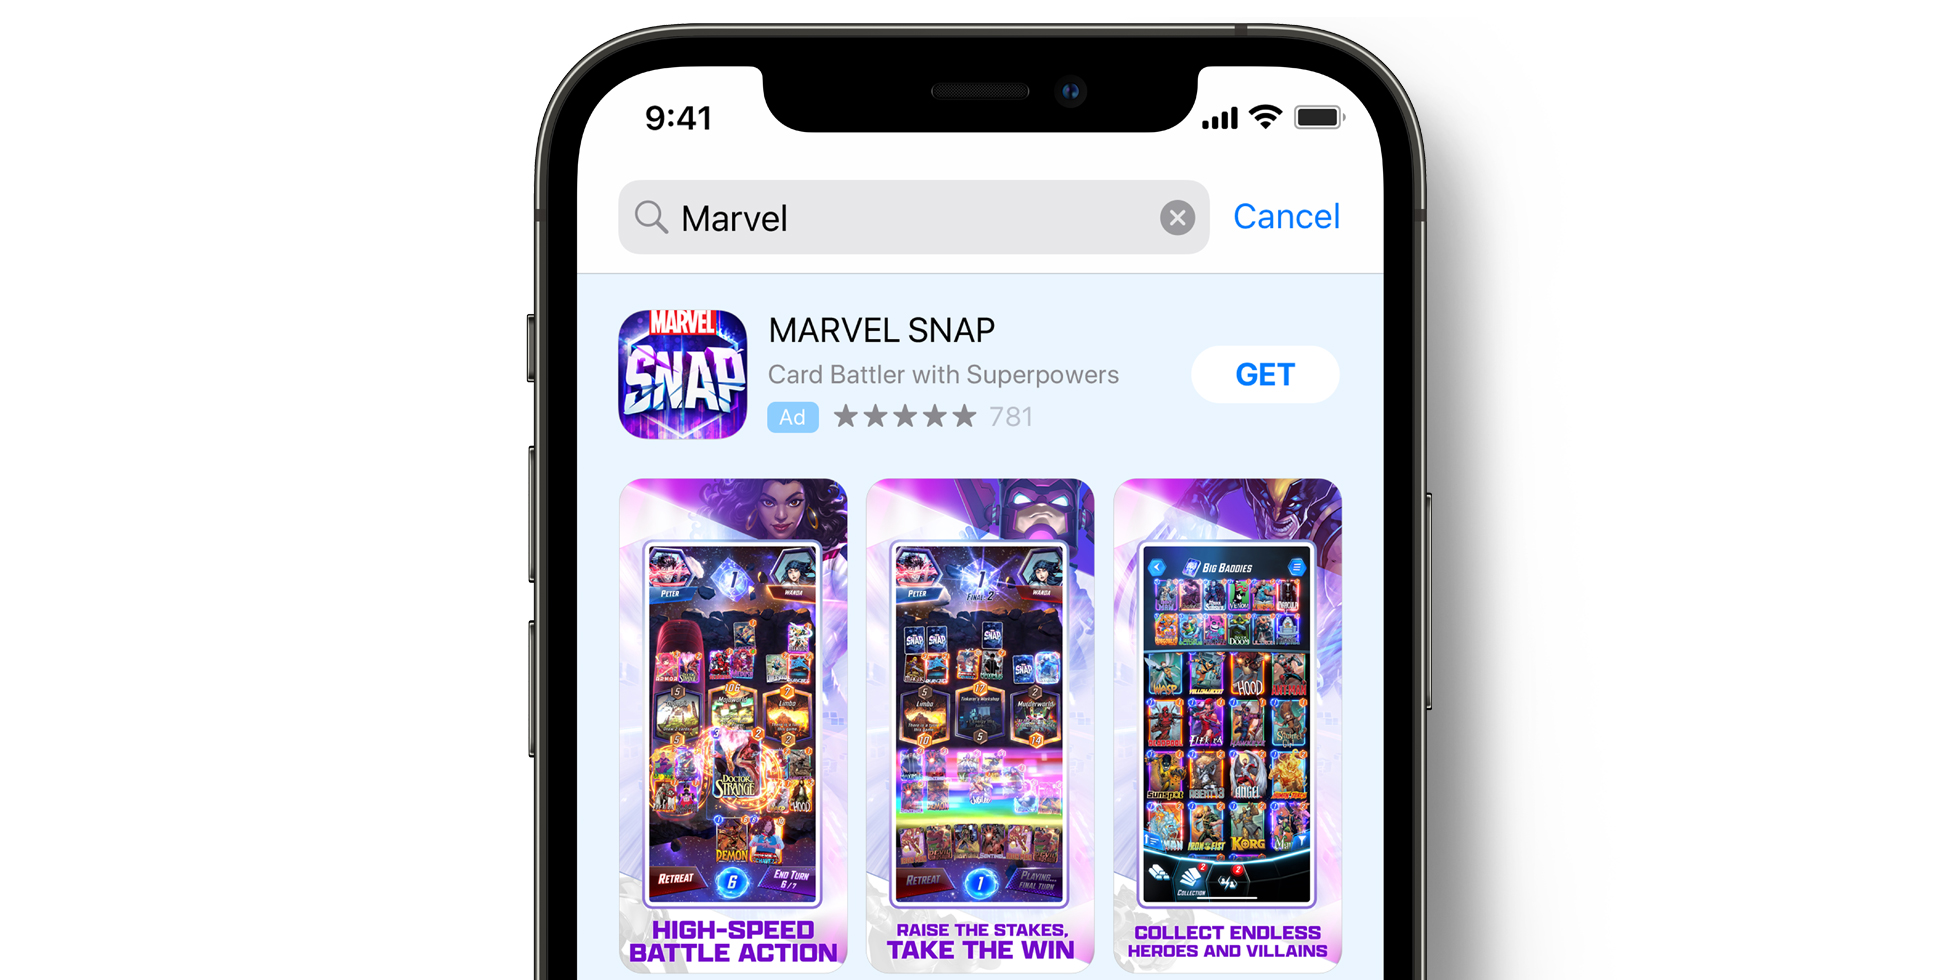 MARVEL SNAP ad on the App Store 